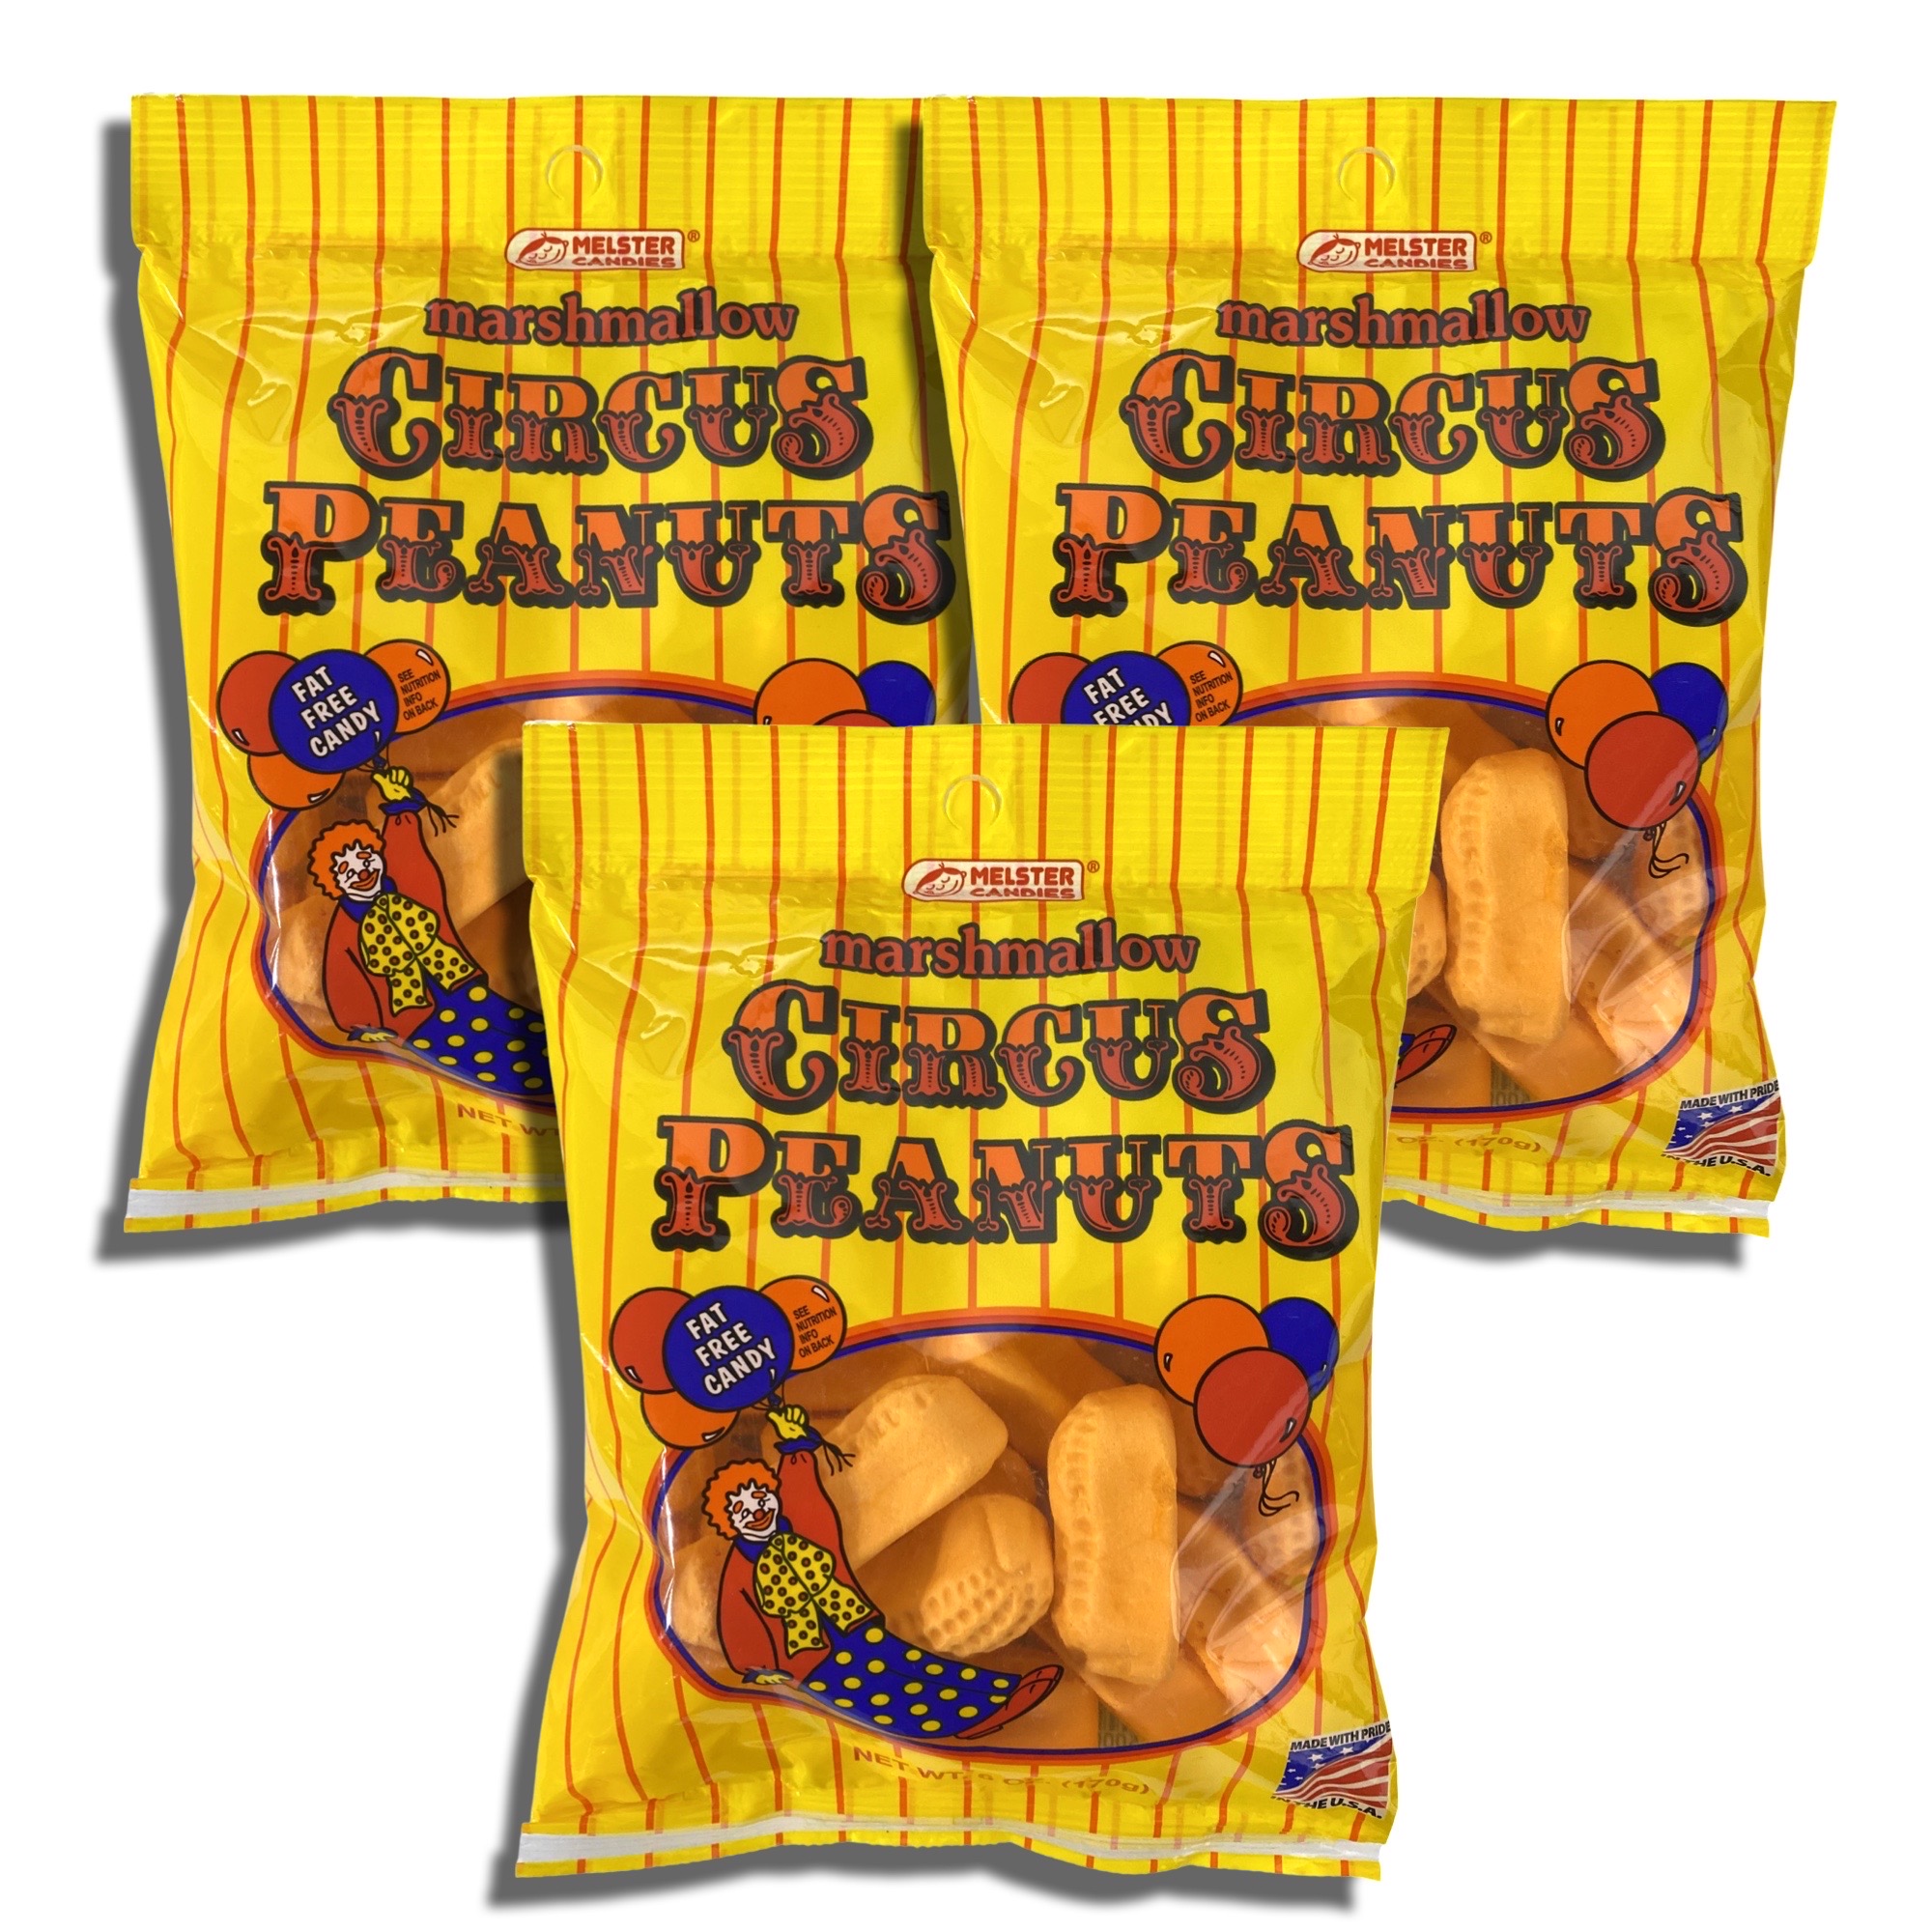 Marshmallow Circus Peanuts by Melster Bundled by Tribeca Curations | 6 Oz | Value Case Pack of 12 bags - image 3 of 5